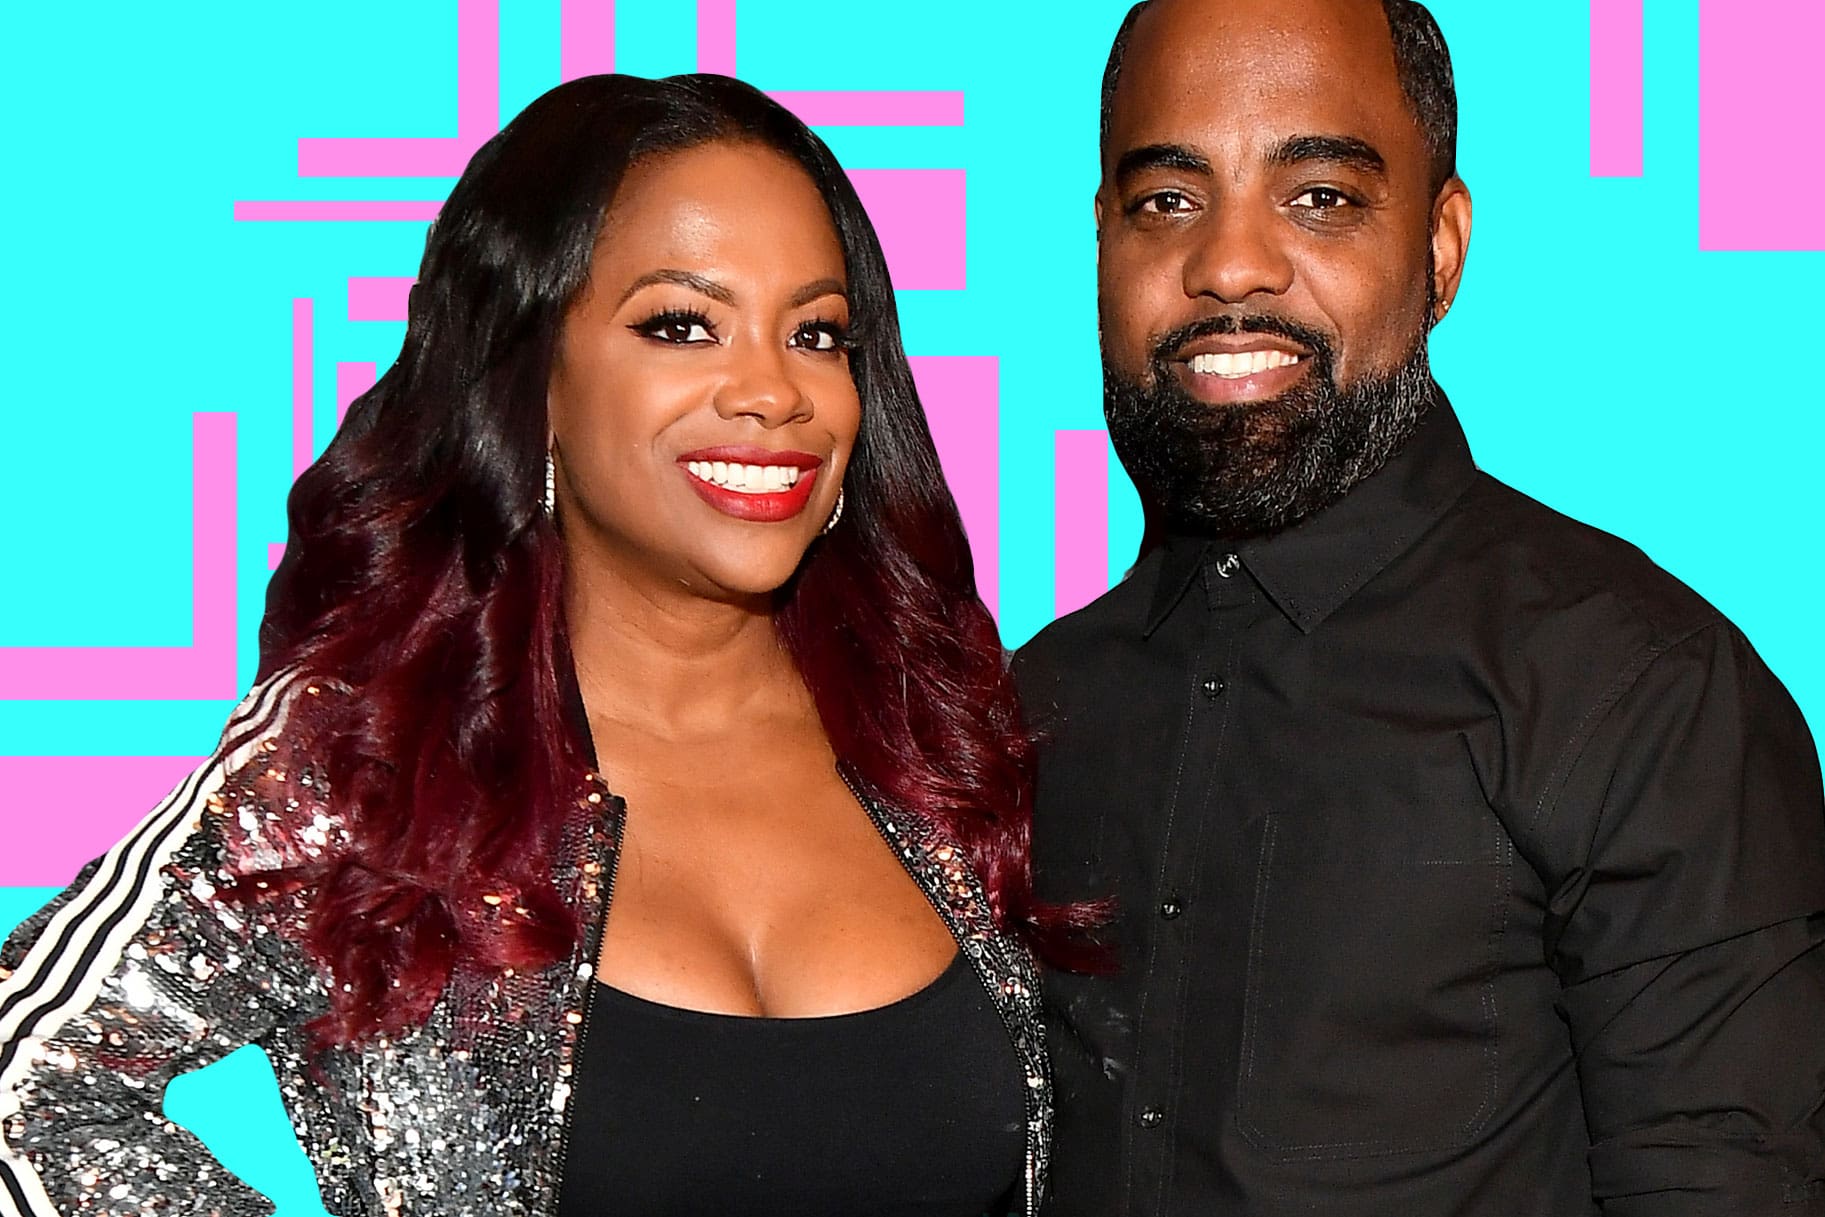 Kandi Burruss Blows Fans' Minds Away With A Jaw-Dropping Look - Check Out Her Massive Cleavage And Gorgeous Curves